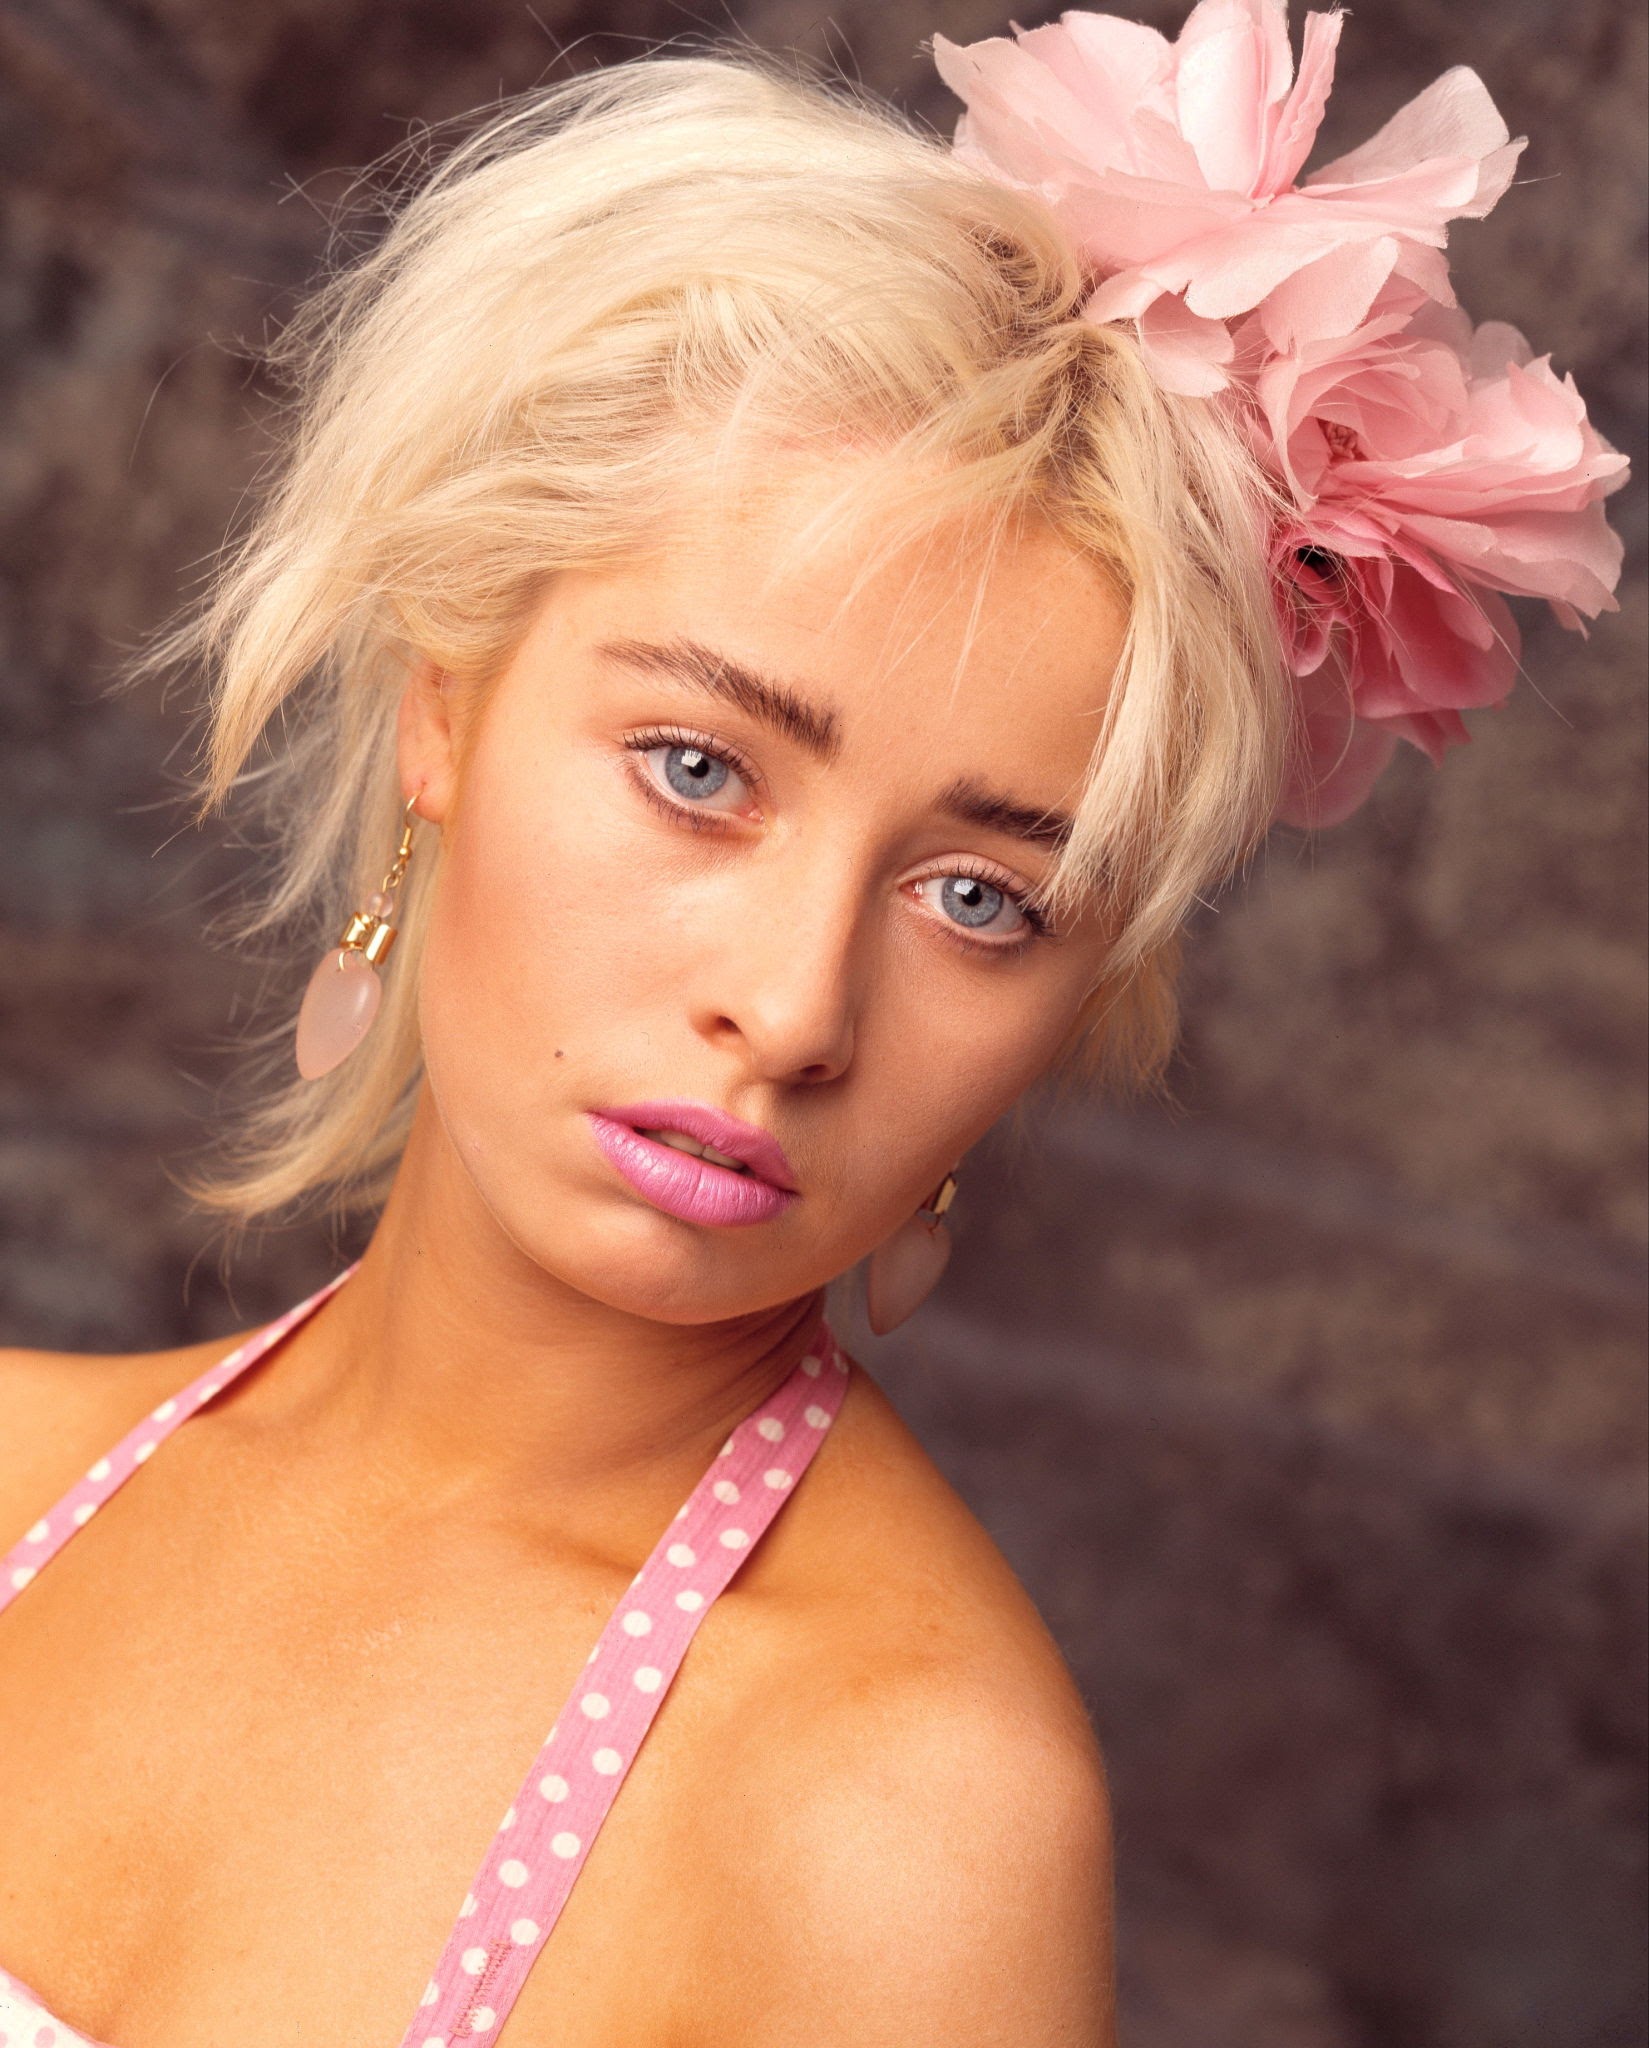 Please join me here at in wishing the one and only Wendy James a very Happy Birthday today  